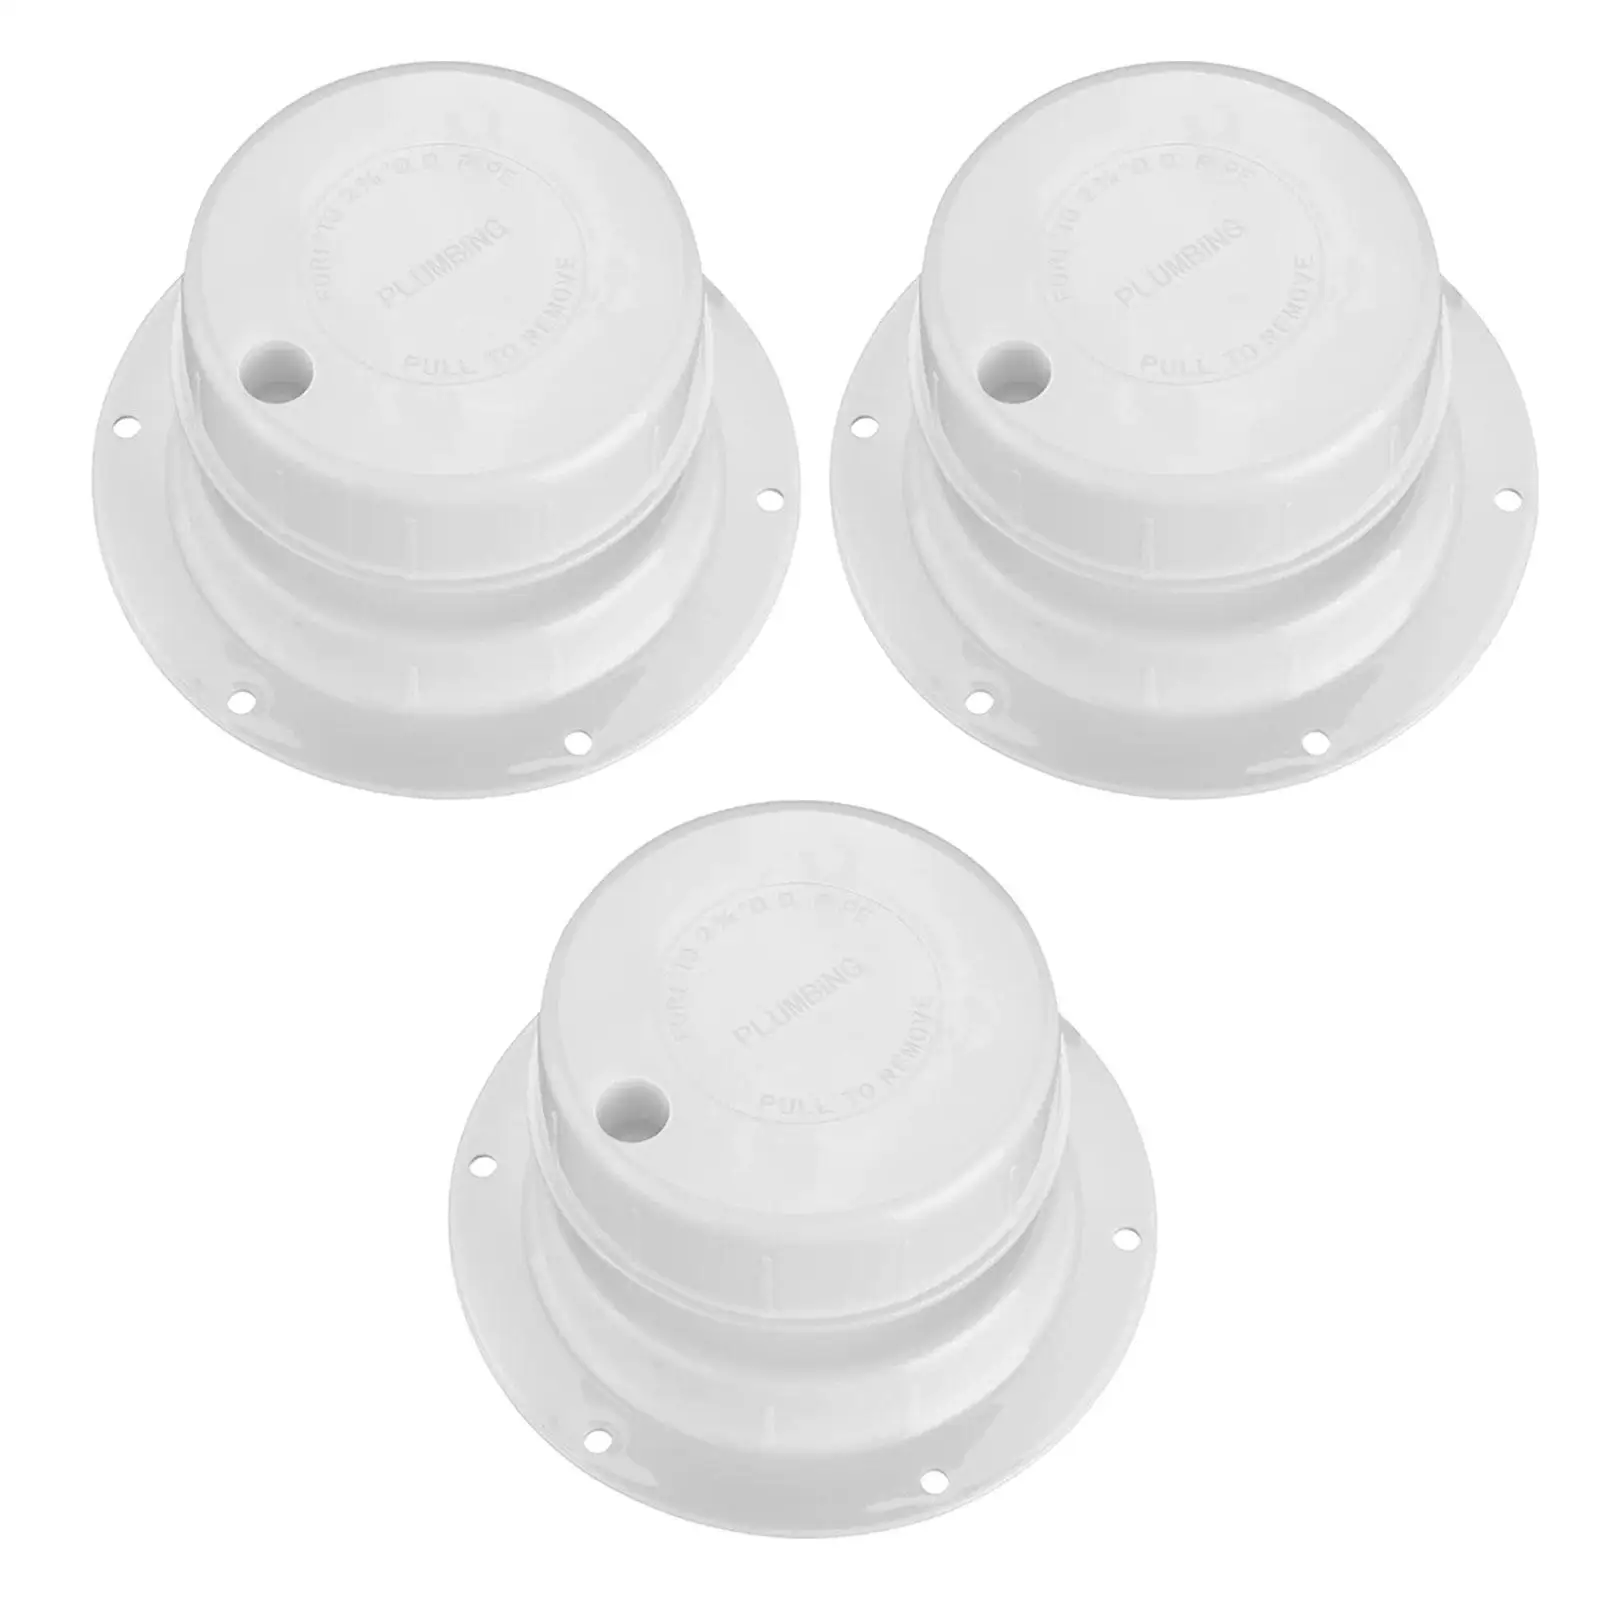 RV Plumbing Vent Cap Directly Replace for 1 to 2 3/8 inch Pipe Camper Vent Cap White RV Sewer Vent Cap for Trailers Campers